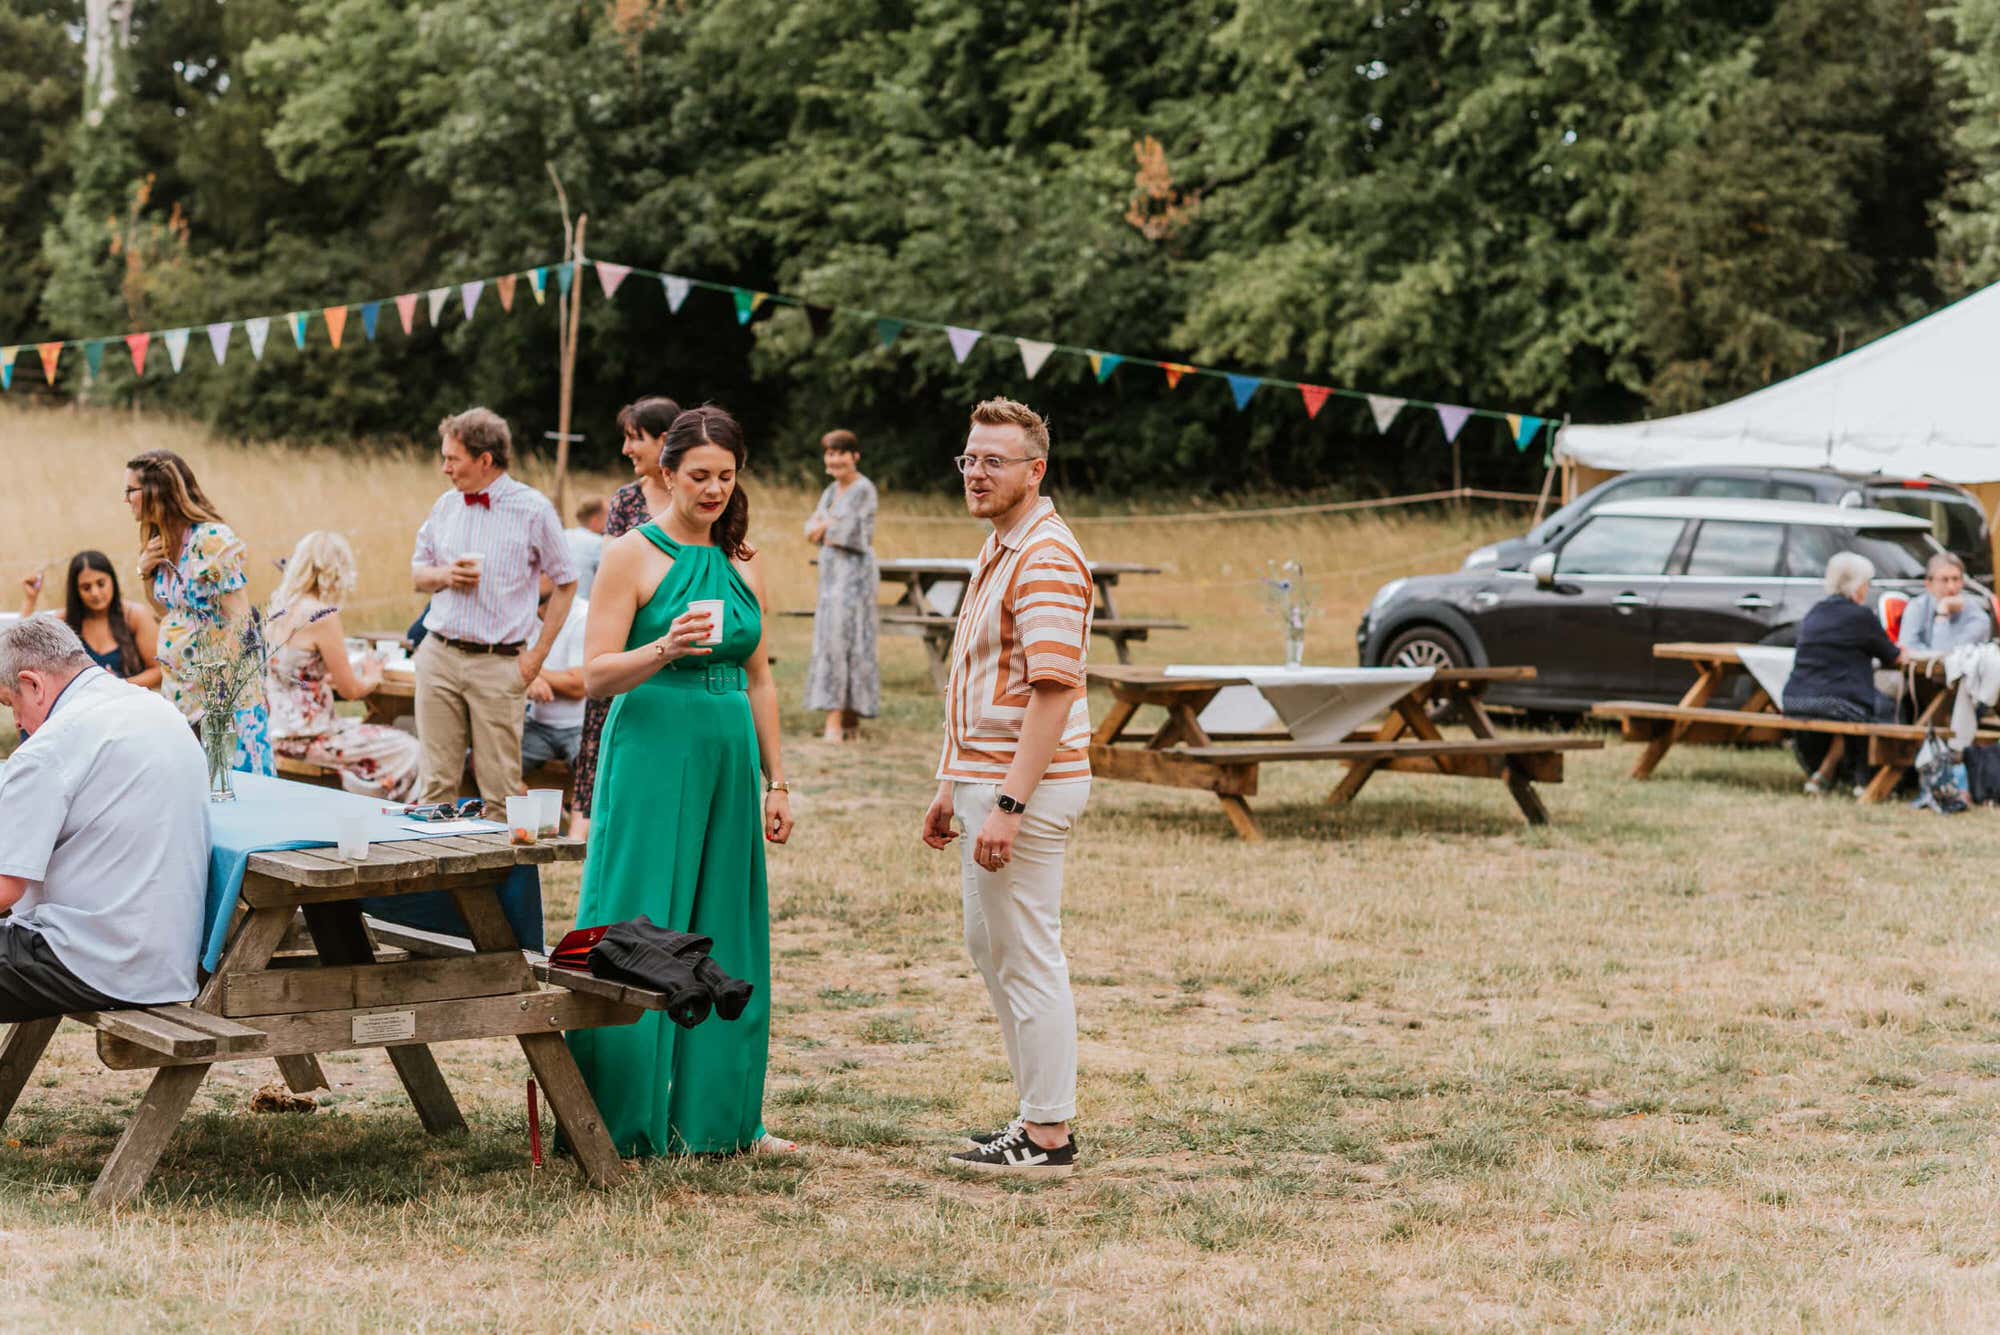 groom talking to a lady in green dress, bunting decorations and pub benches